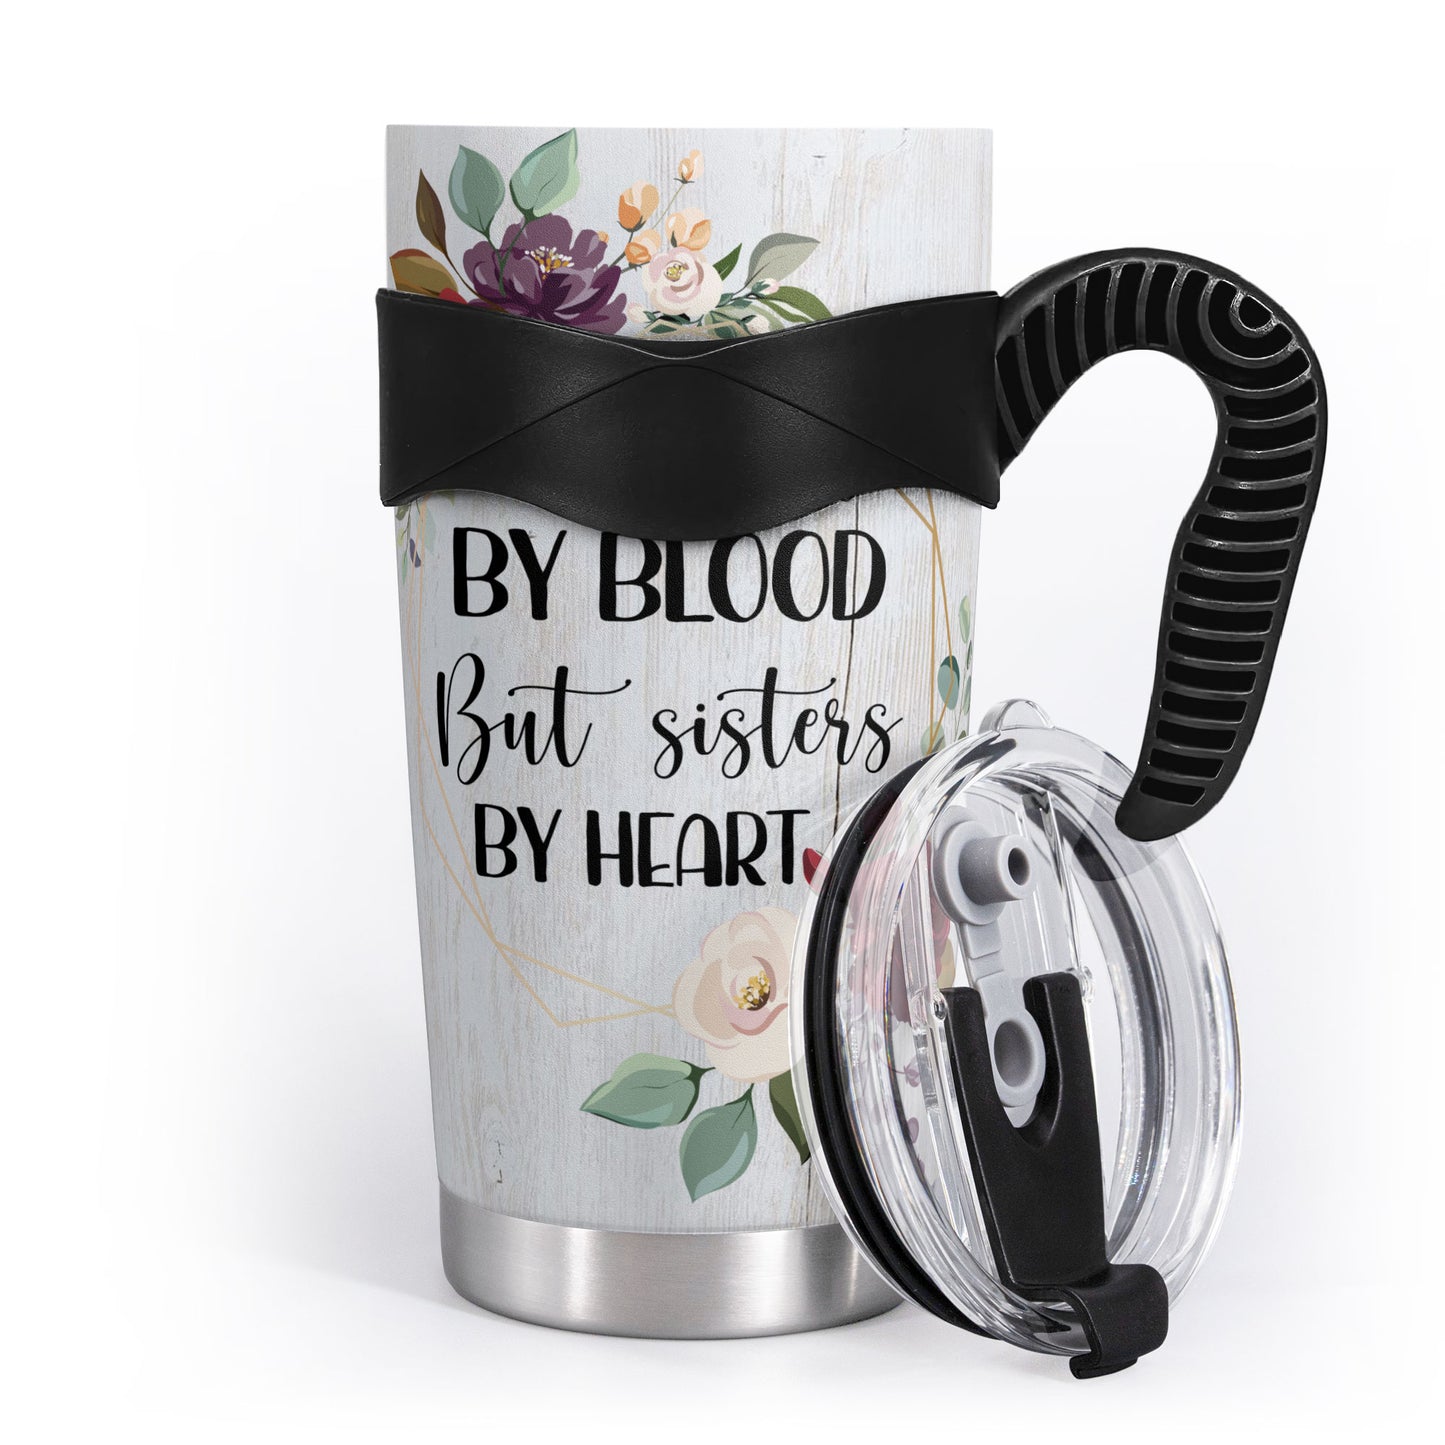 Soul Sisters Not Sisters By Blood But Sisters By Heart - Personalized Tumbler Cup